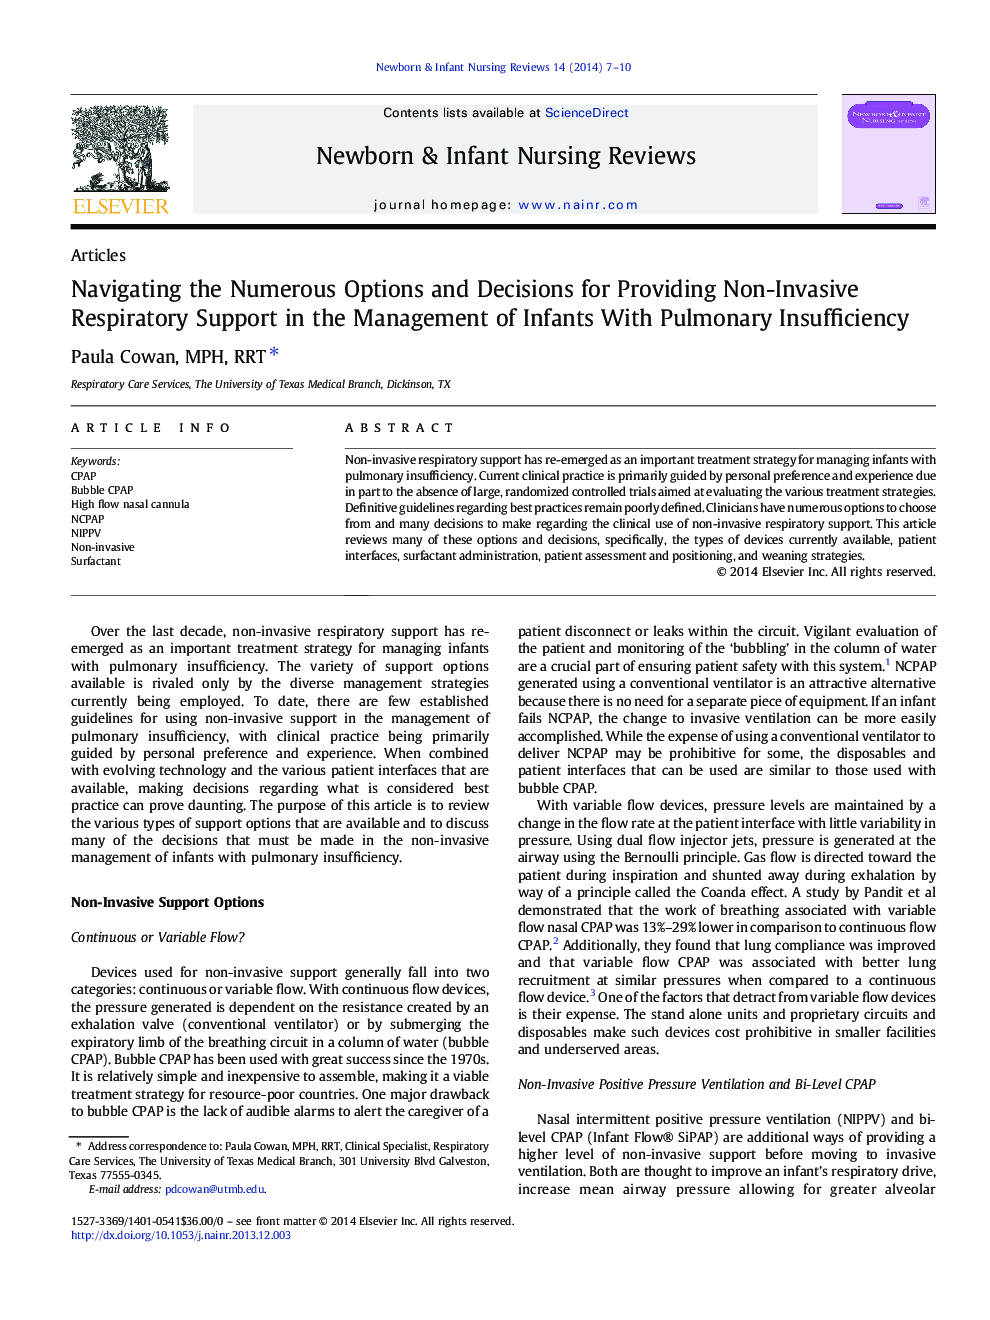 Navigating the Numerous Options and Decisions for Providing Non-Invasive Respiratory Support in the Management of Infants With Pulmonary Insufficiency